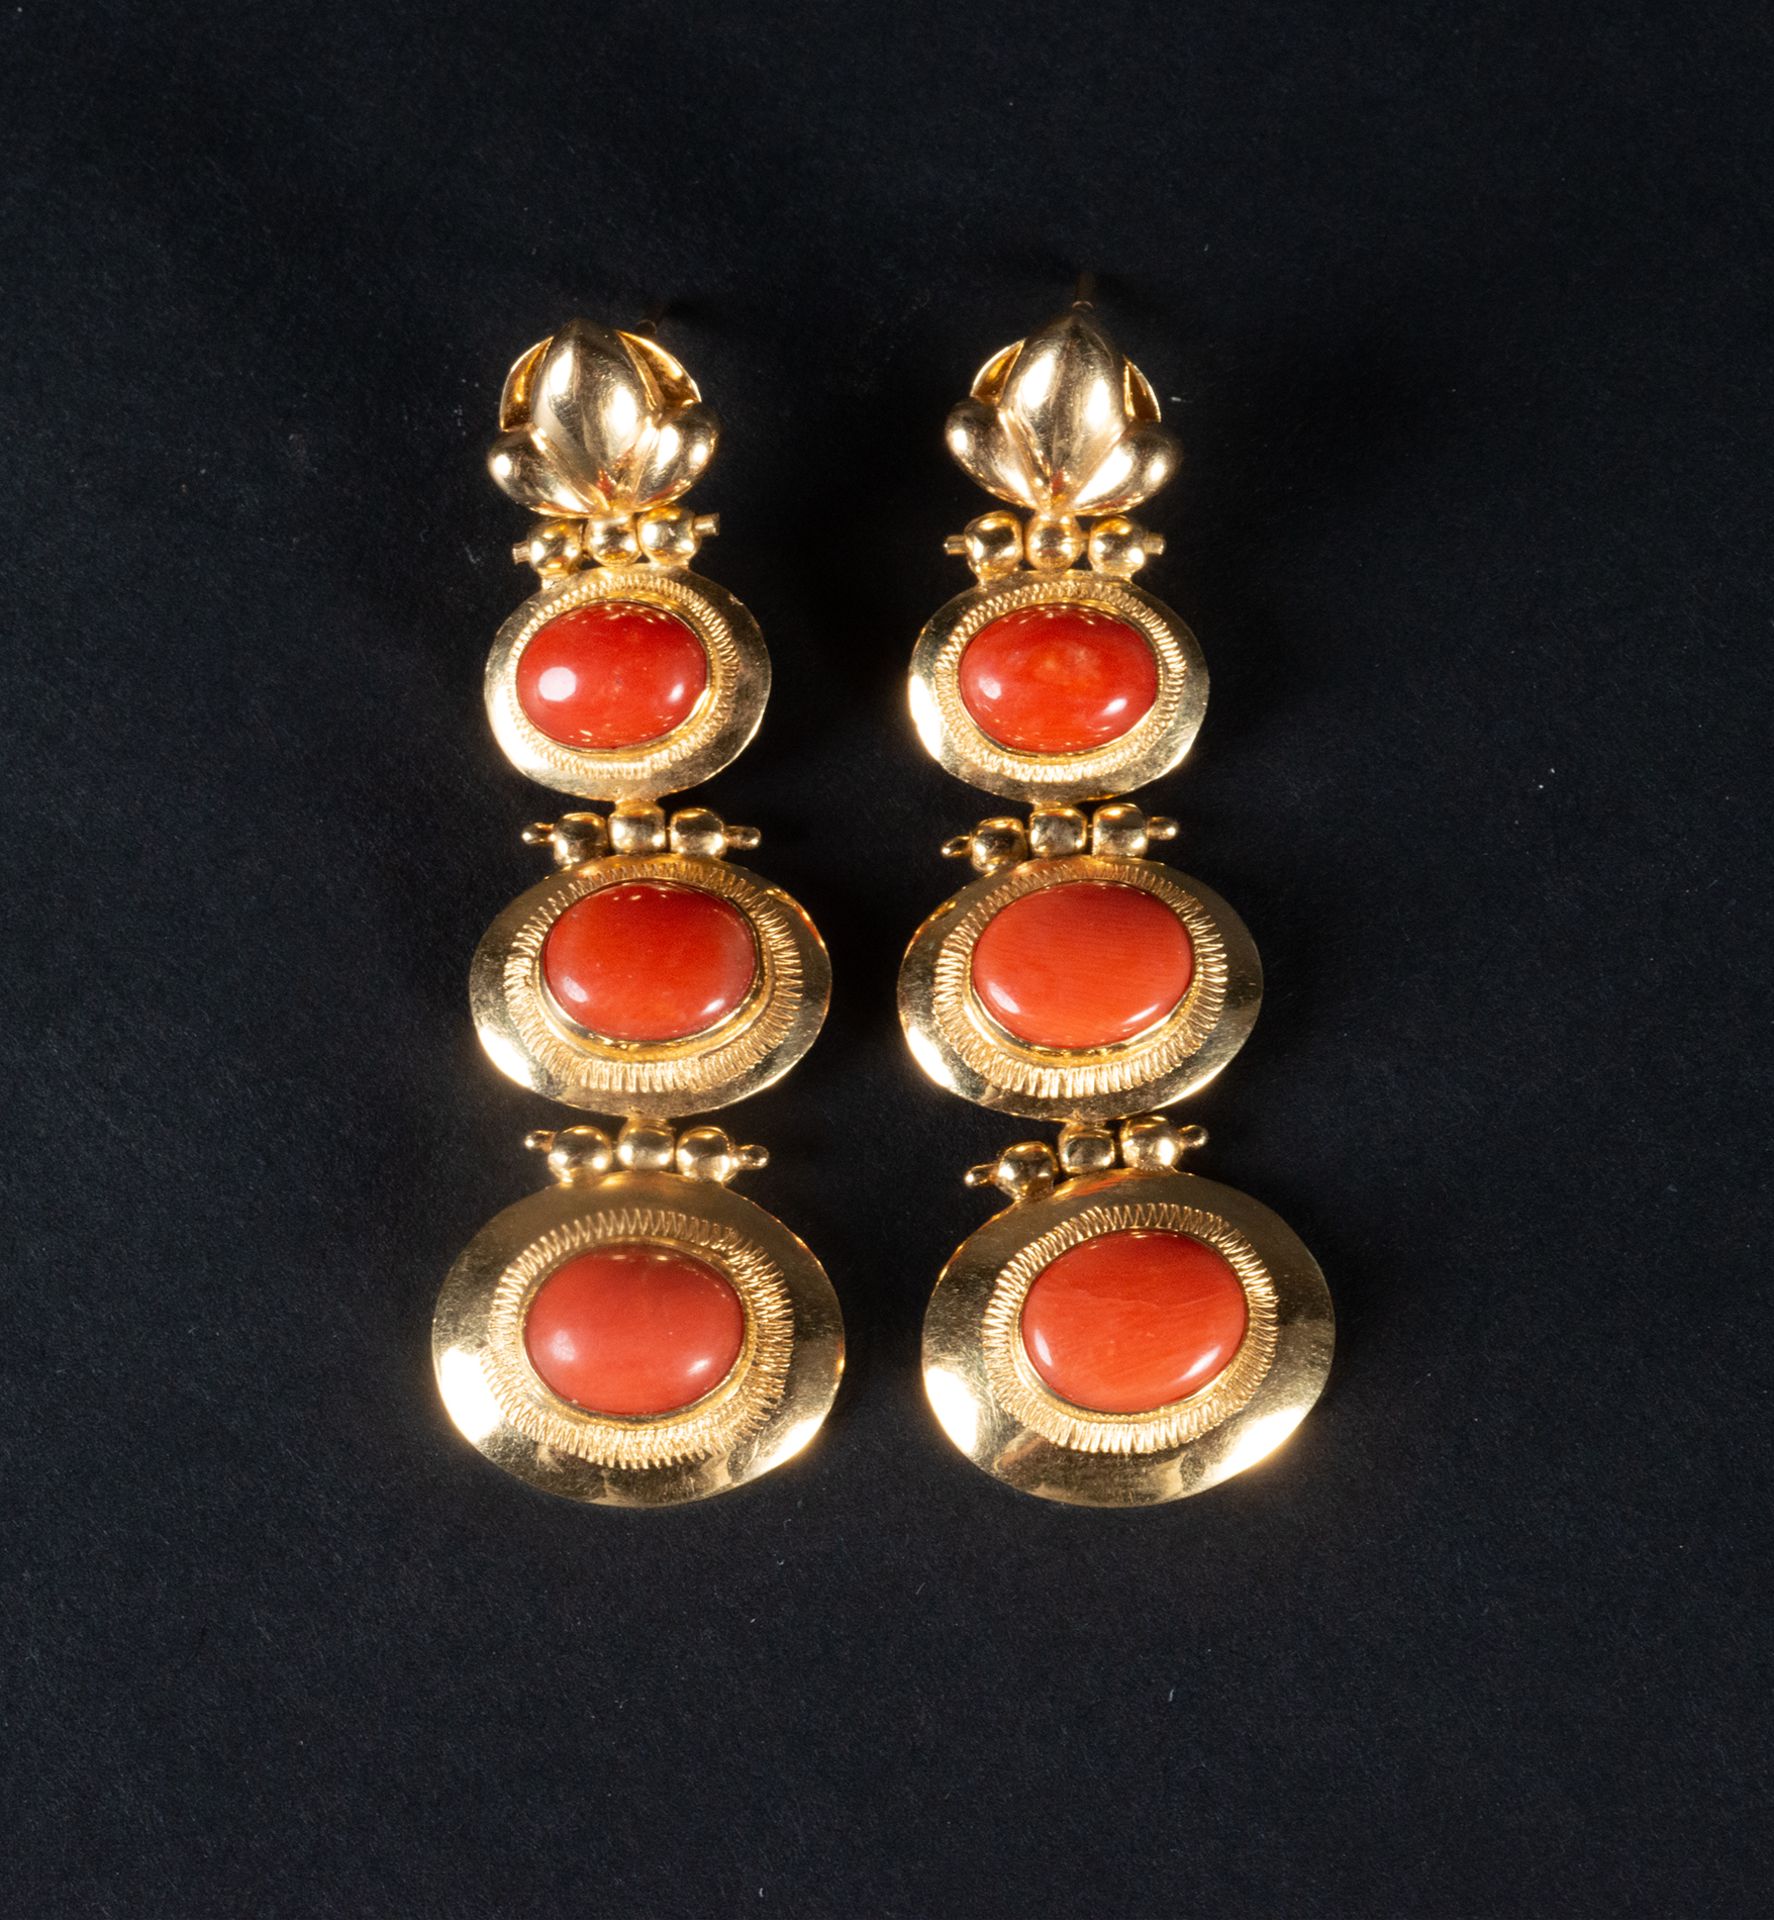 Elegant pair of earrings with three red coral balls mounted in 18k yellow gold